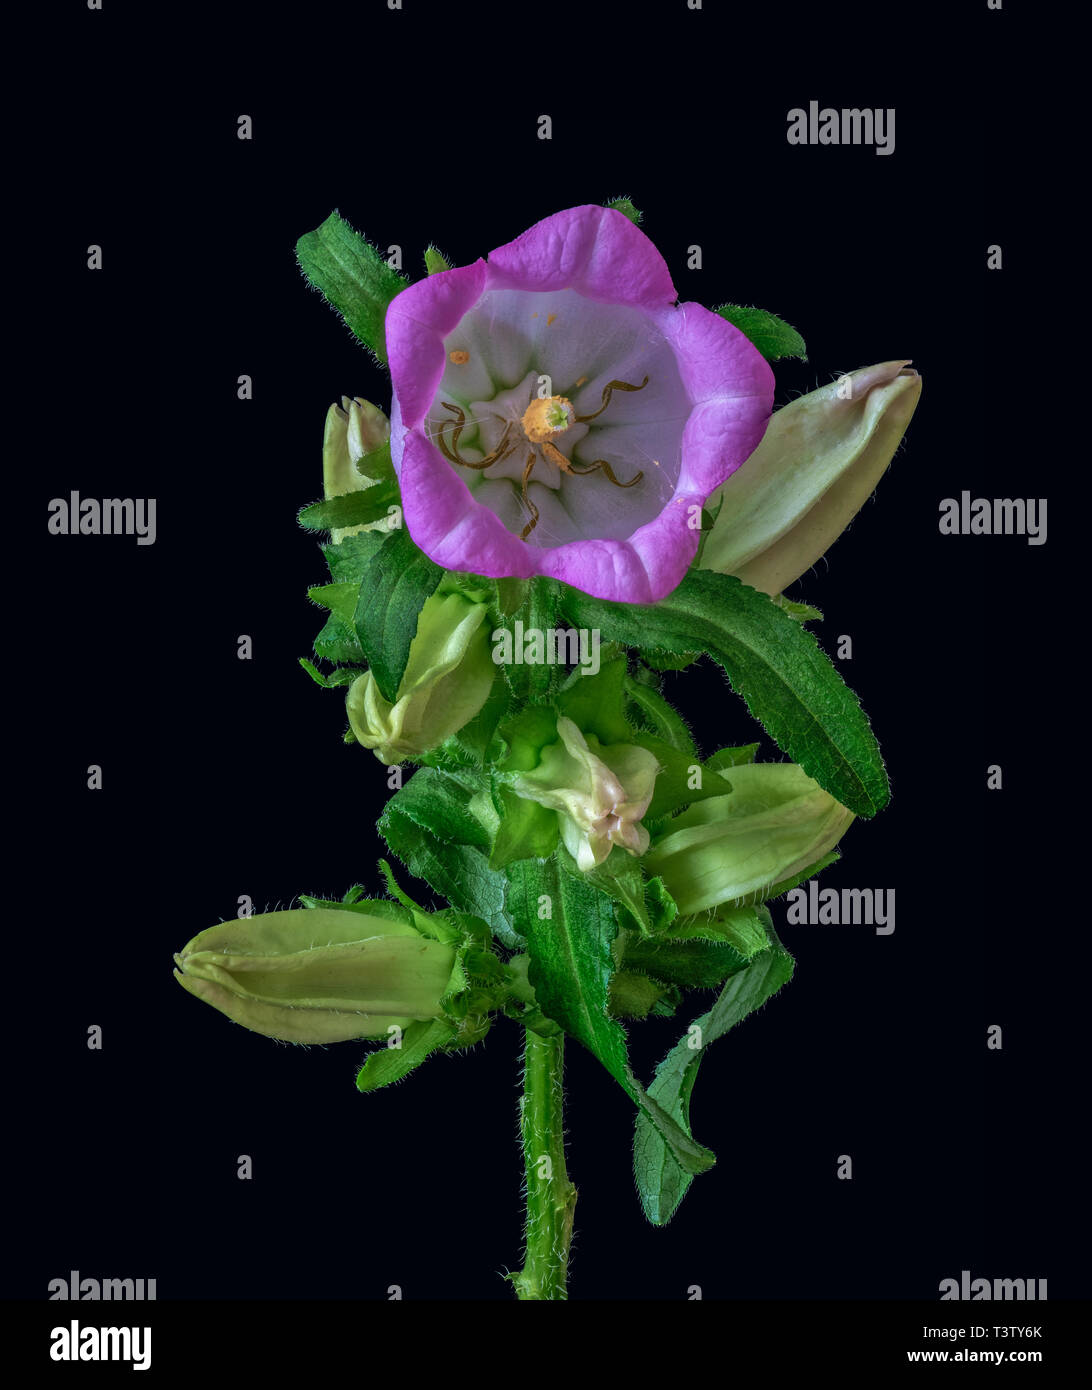 Fine art still life color macro of a single isolated stem of a bellflower/campanula with one open violet blossom,several buds and green leaves Stock Photo